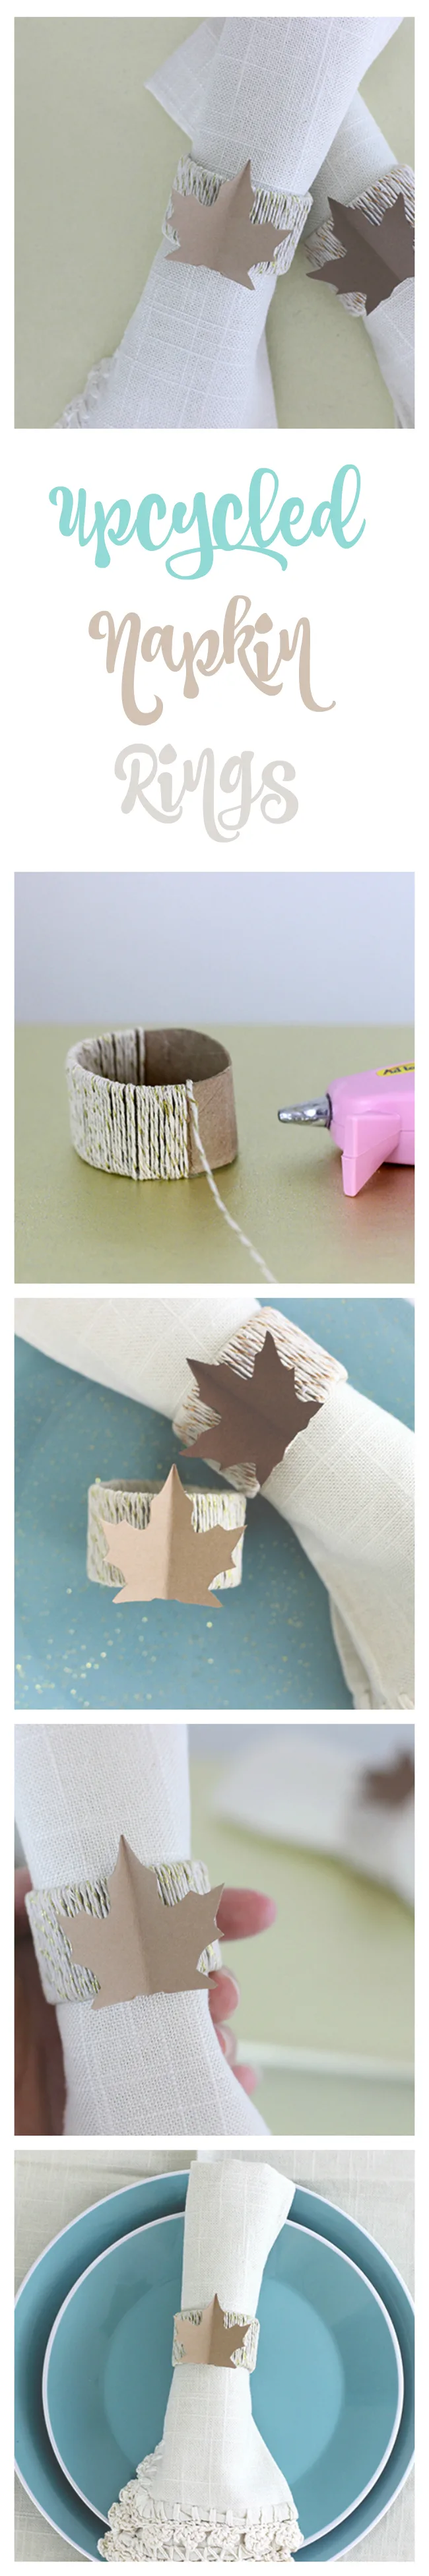 What to do with those toilet paper rolls? Turn them into something fantastic liked napkin rings. 